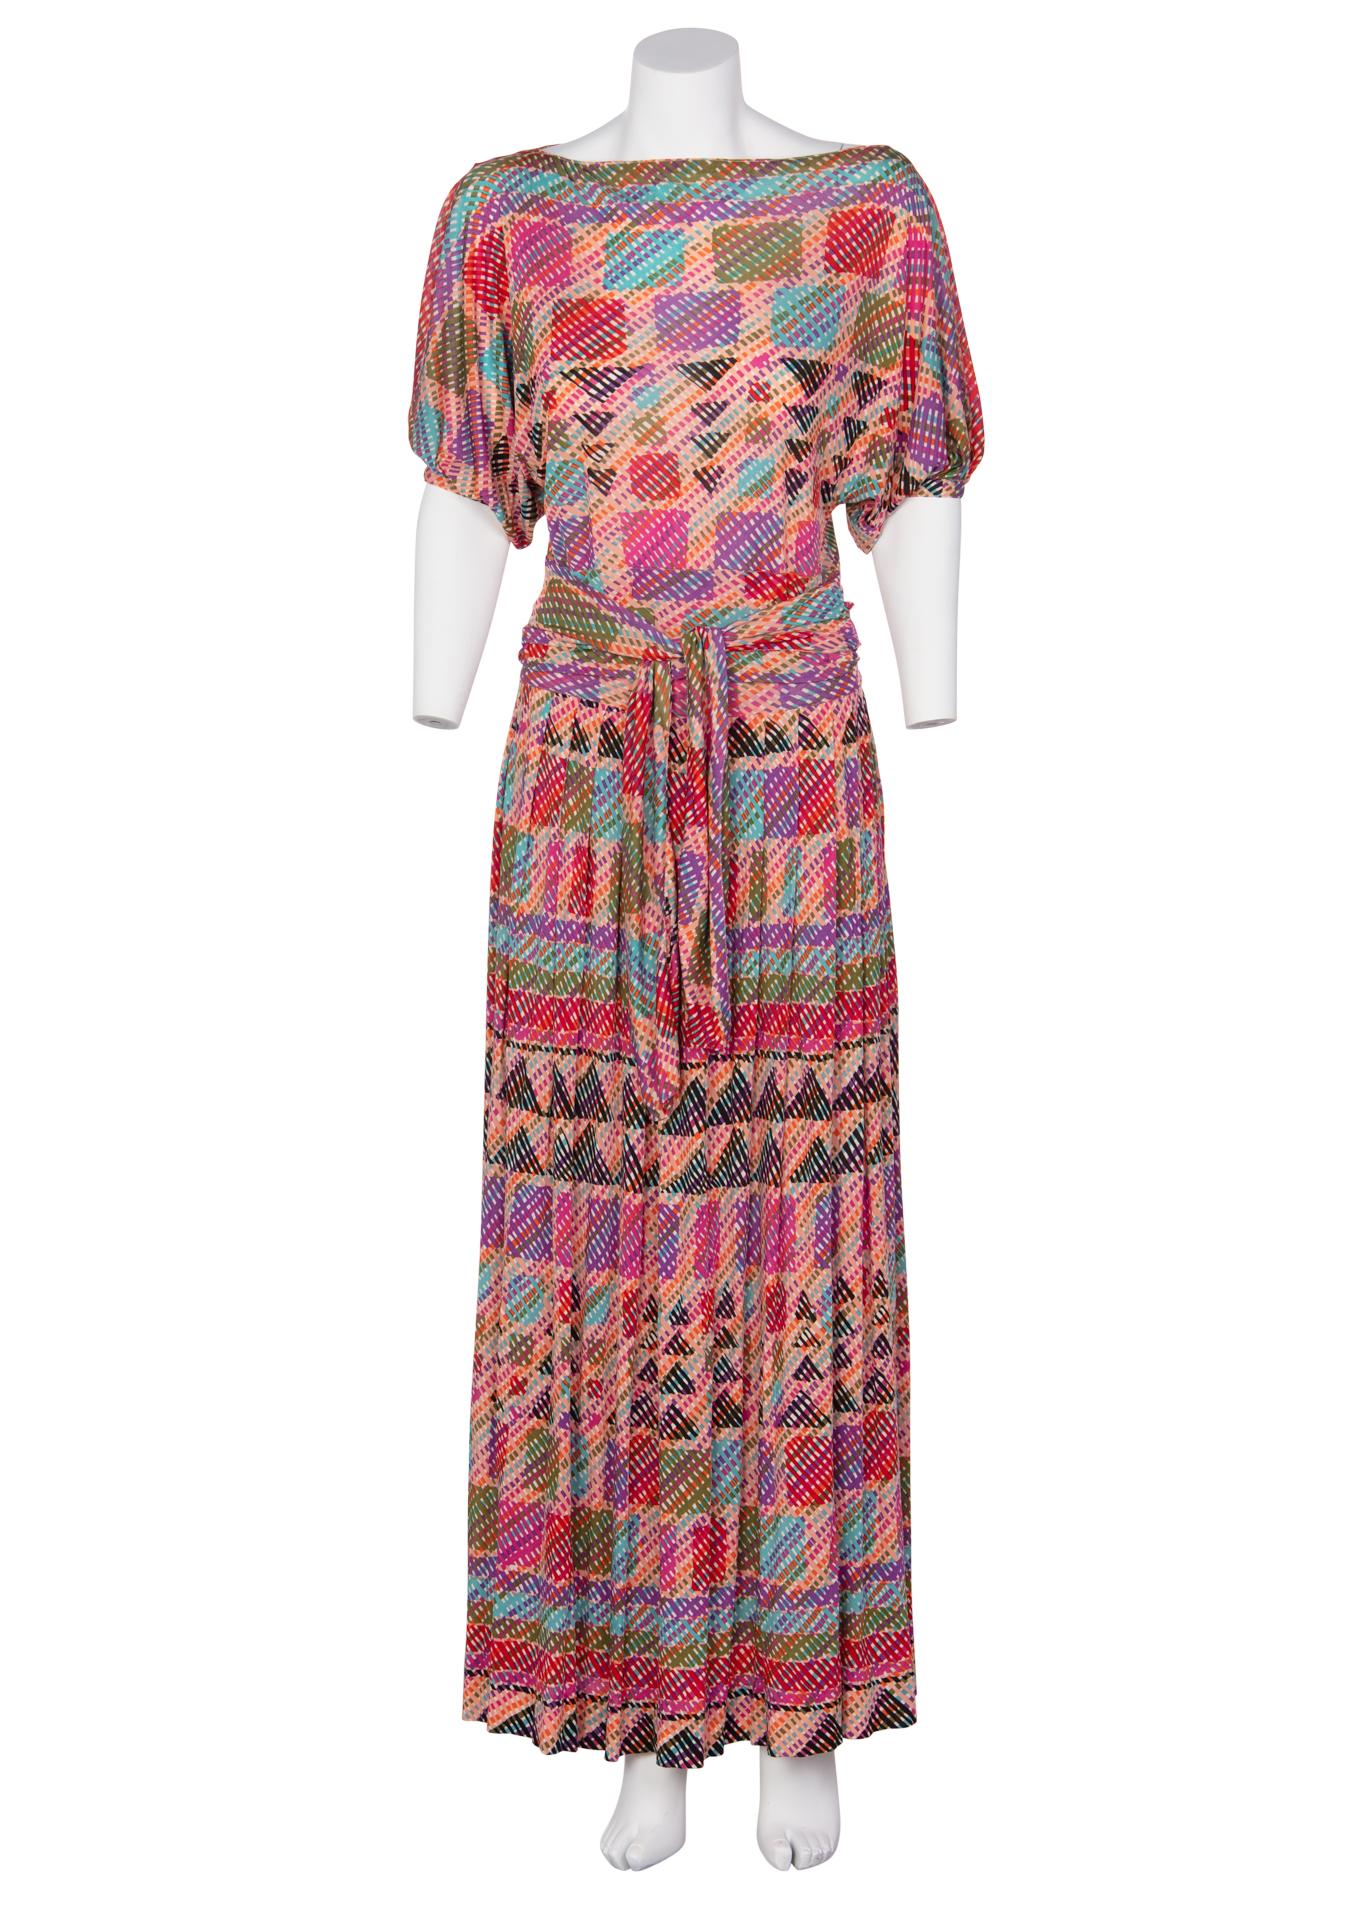 Famed for their iconic kaleidoscopic knits, Missoni crafts jersey fabric into comfortable, creative clothing. Since the conception of the brand in the 1950s, Missoni has mastered the art of pattern mixing and combinations. As with this 1970s maxi